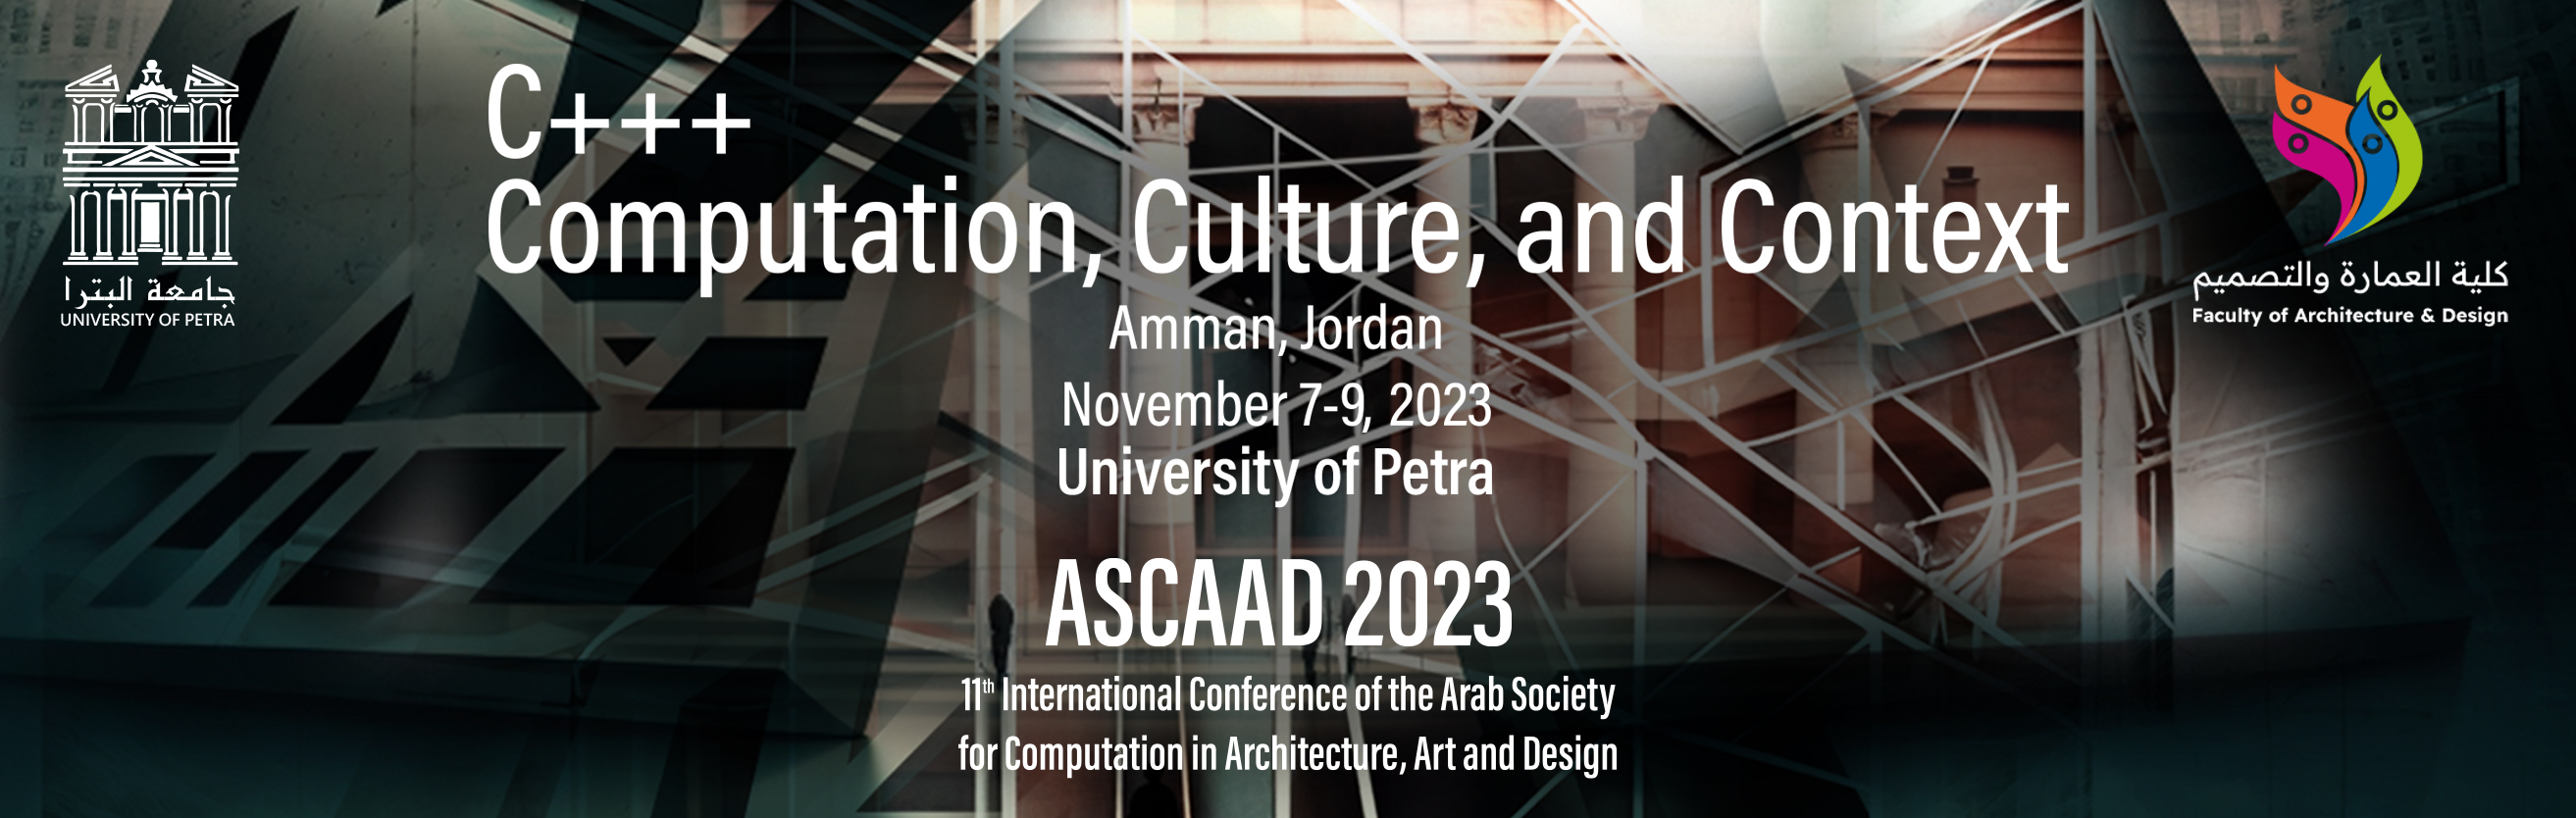 ASCAAD 2023 Conference